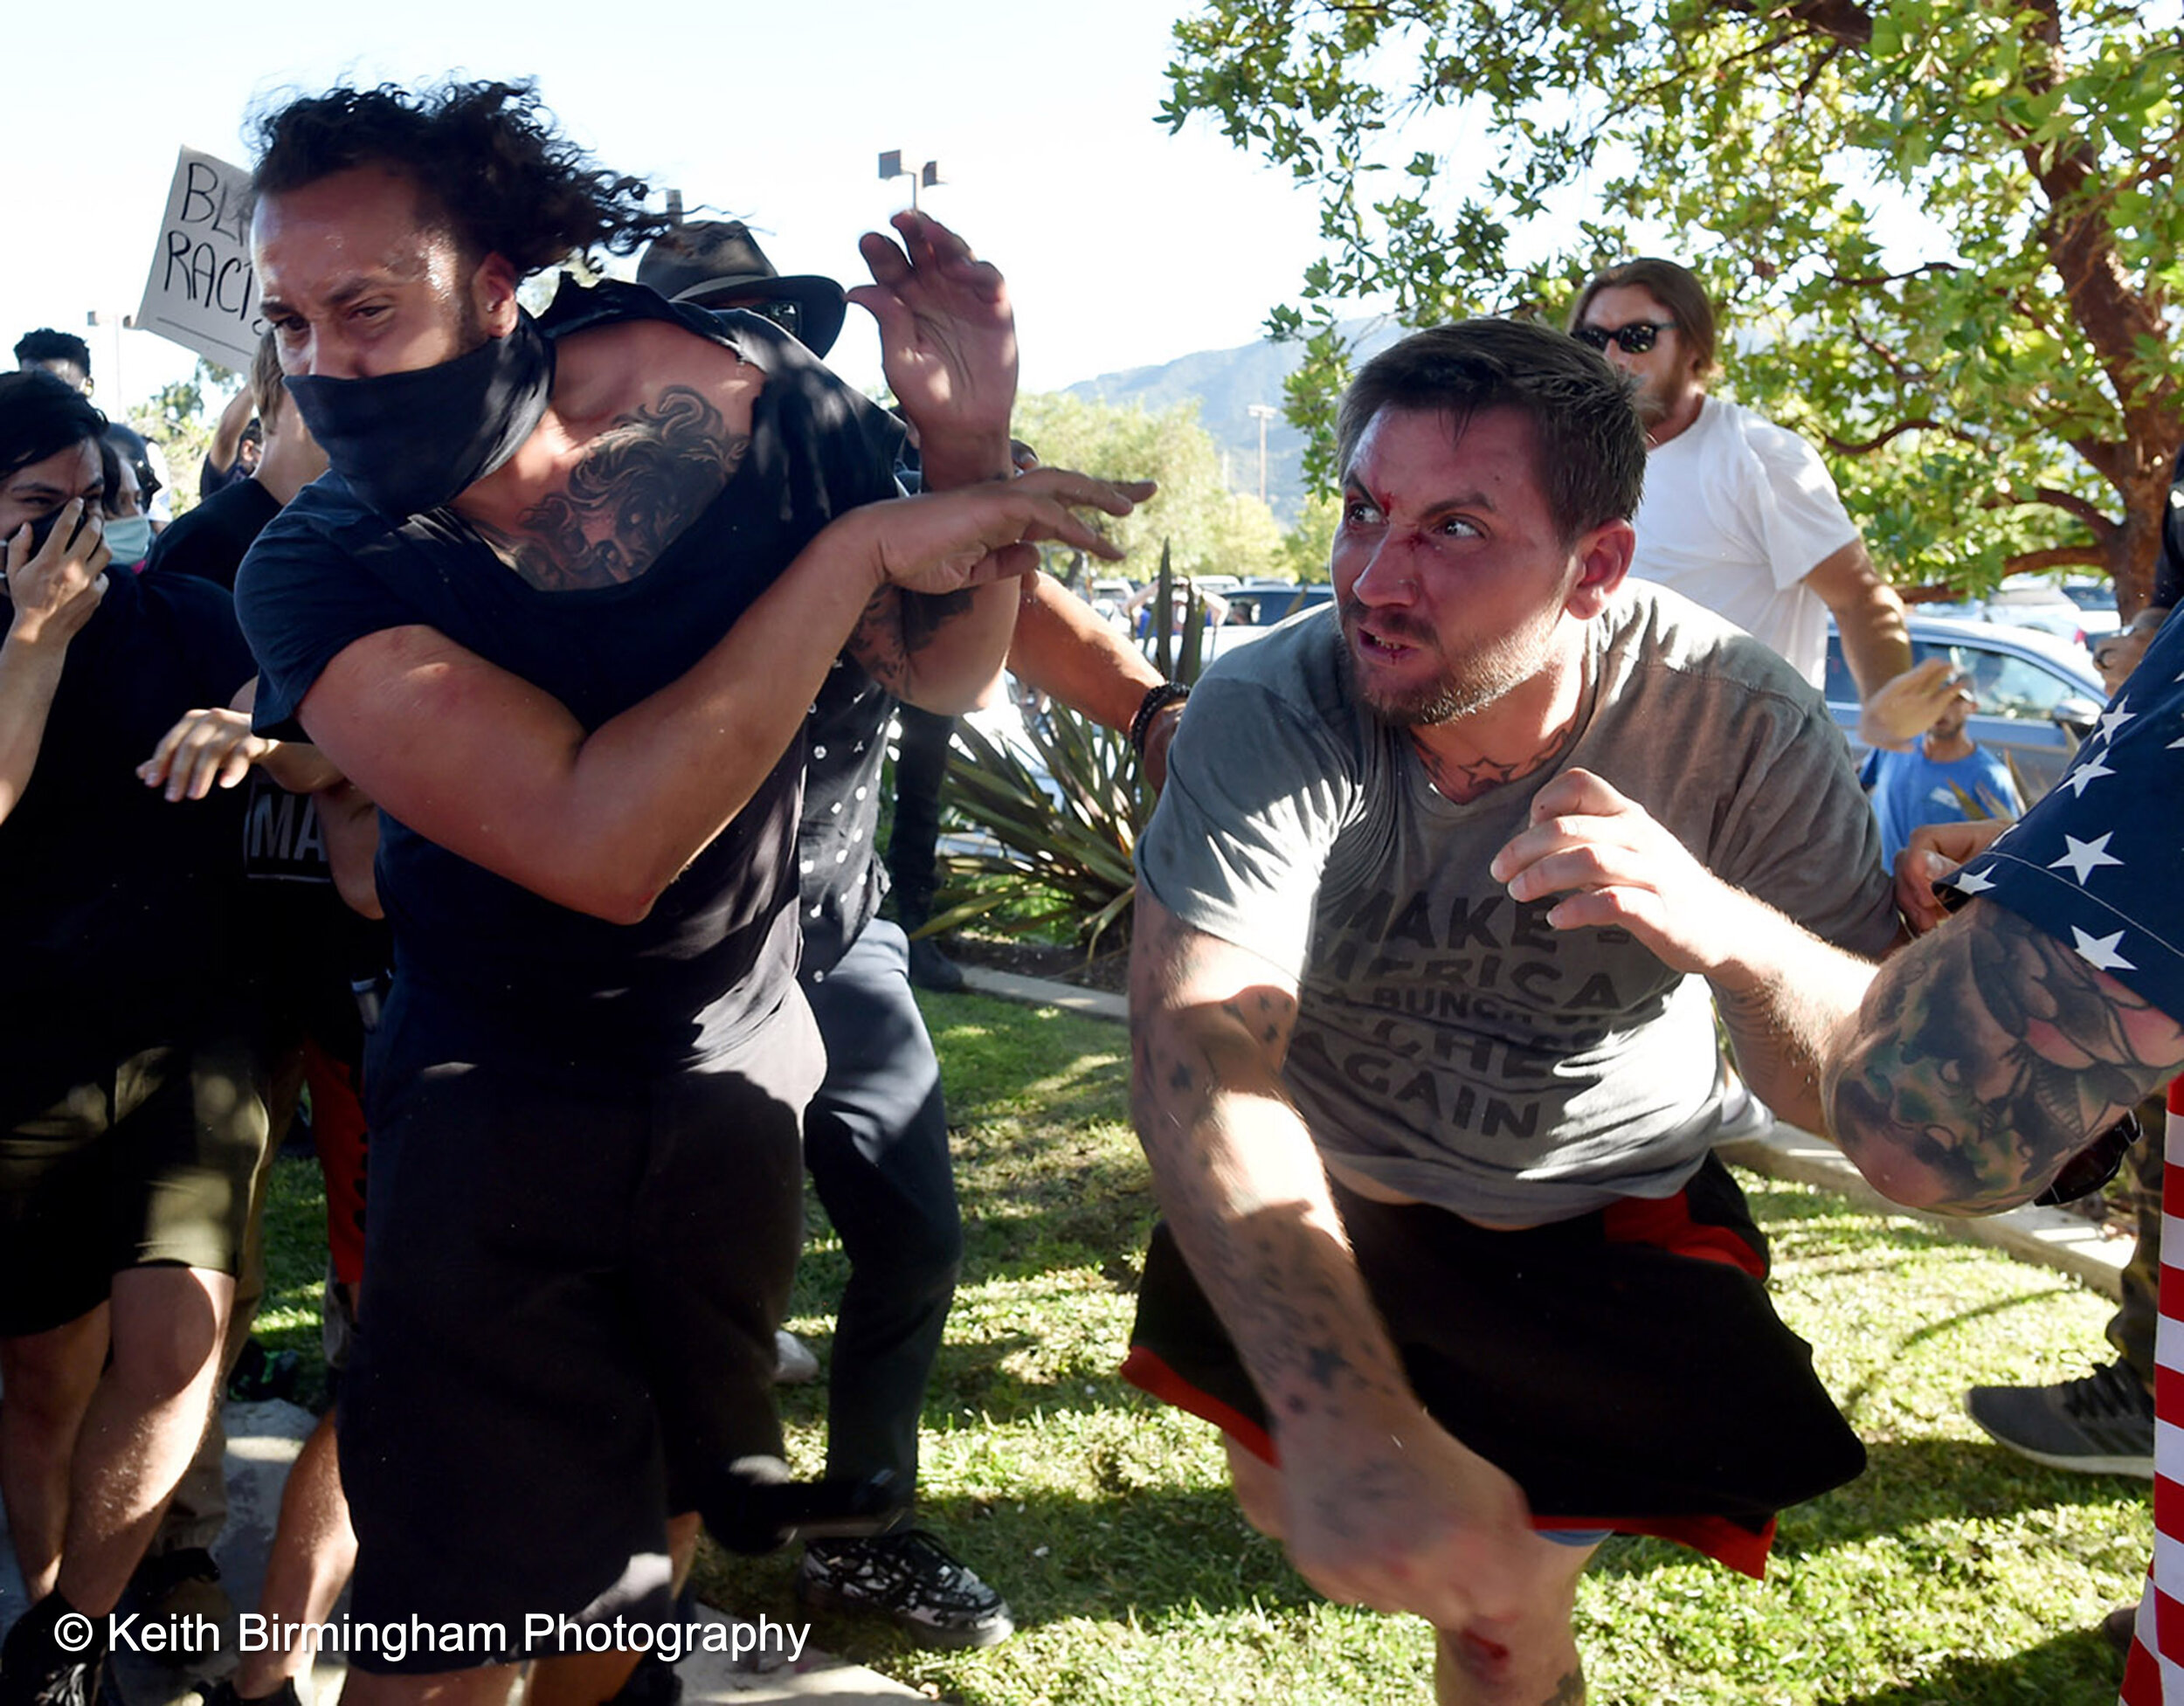  A Pro Trump supporter, right, punches a Black Lives Matter supporter during a confrontation between Black Lives Matter and Pro-Trump supporters at a rally along Foothill Blvd between the Albertsons and In-N-Out Burger in Tujunga, California on Frida